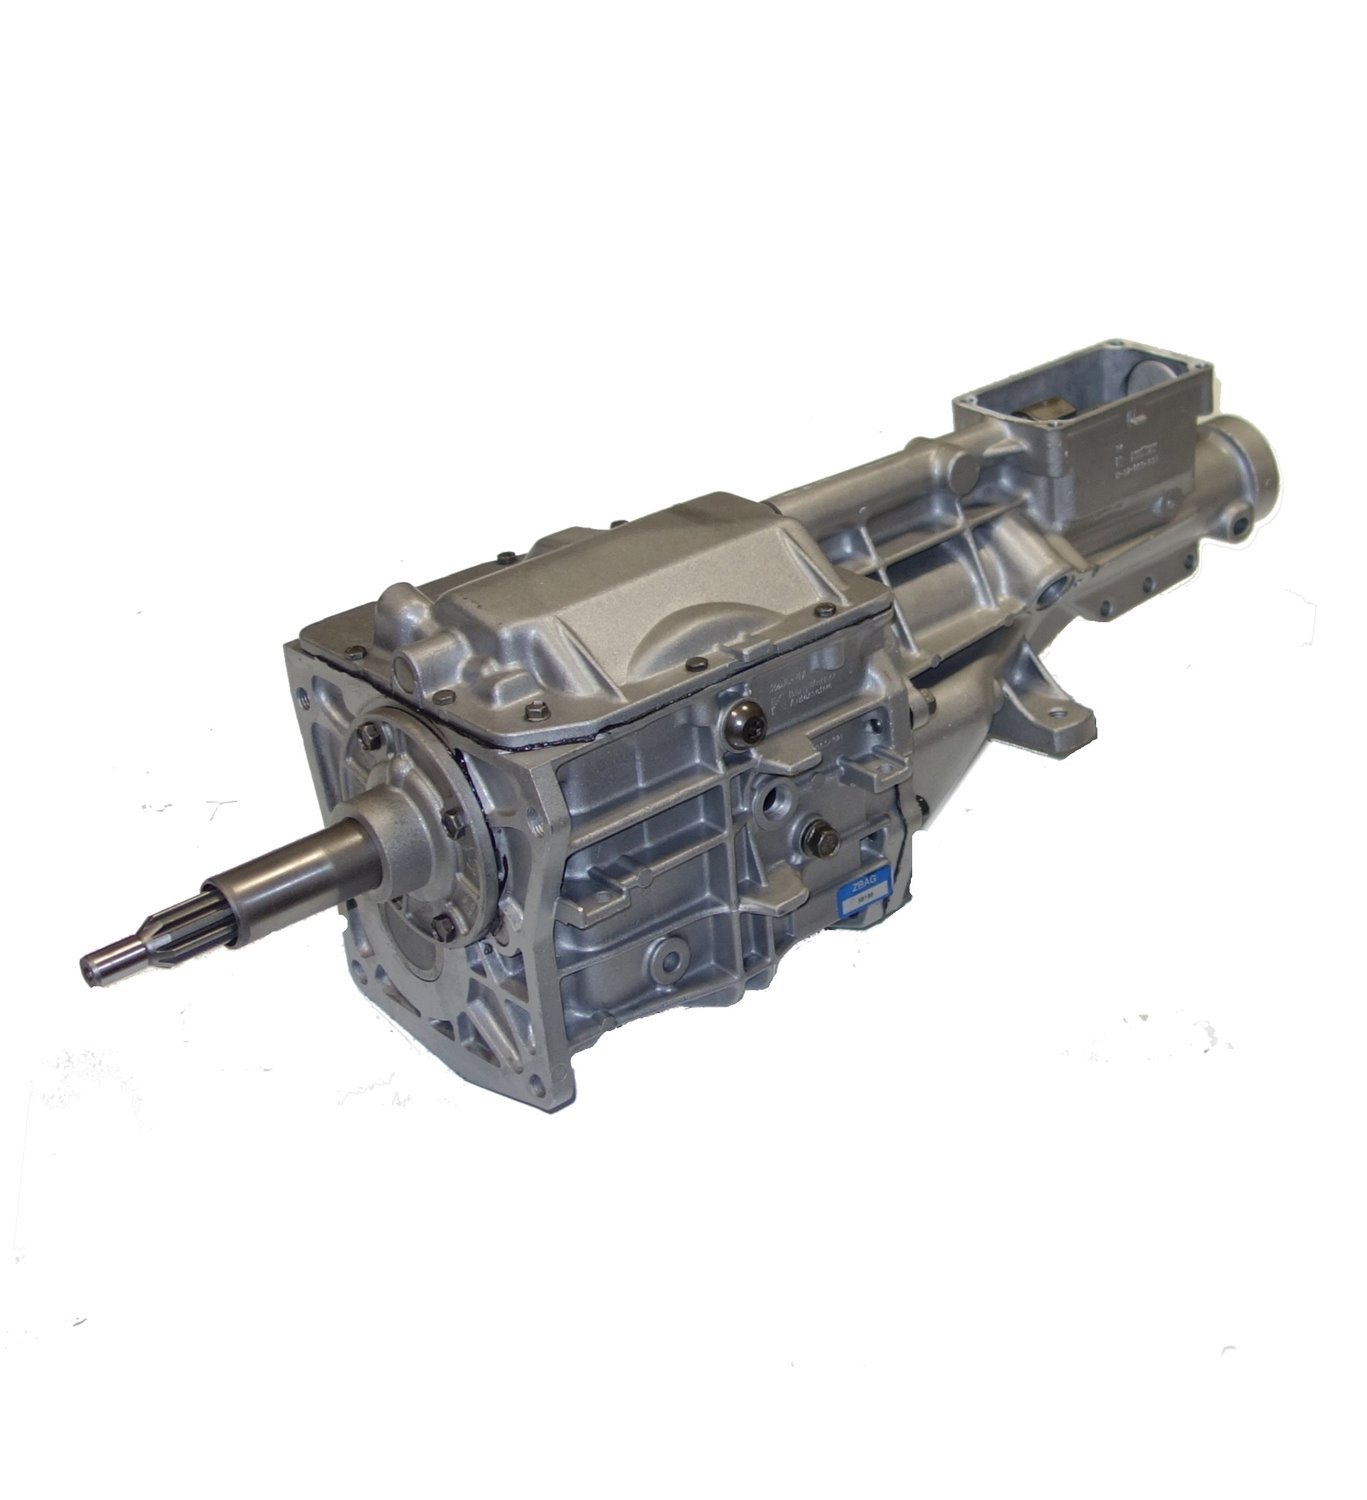 Remanufactured T5 Manual Transmission for Ford 85-93 Mustang V8, 5 Speed